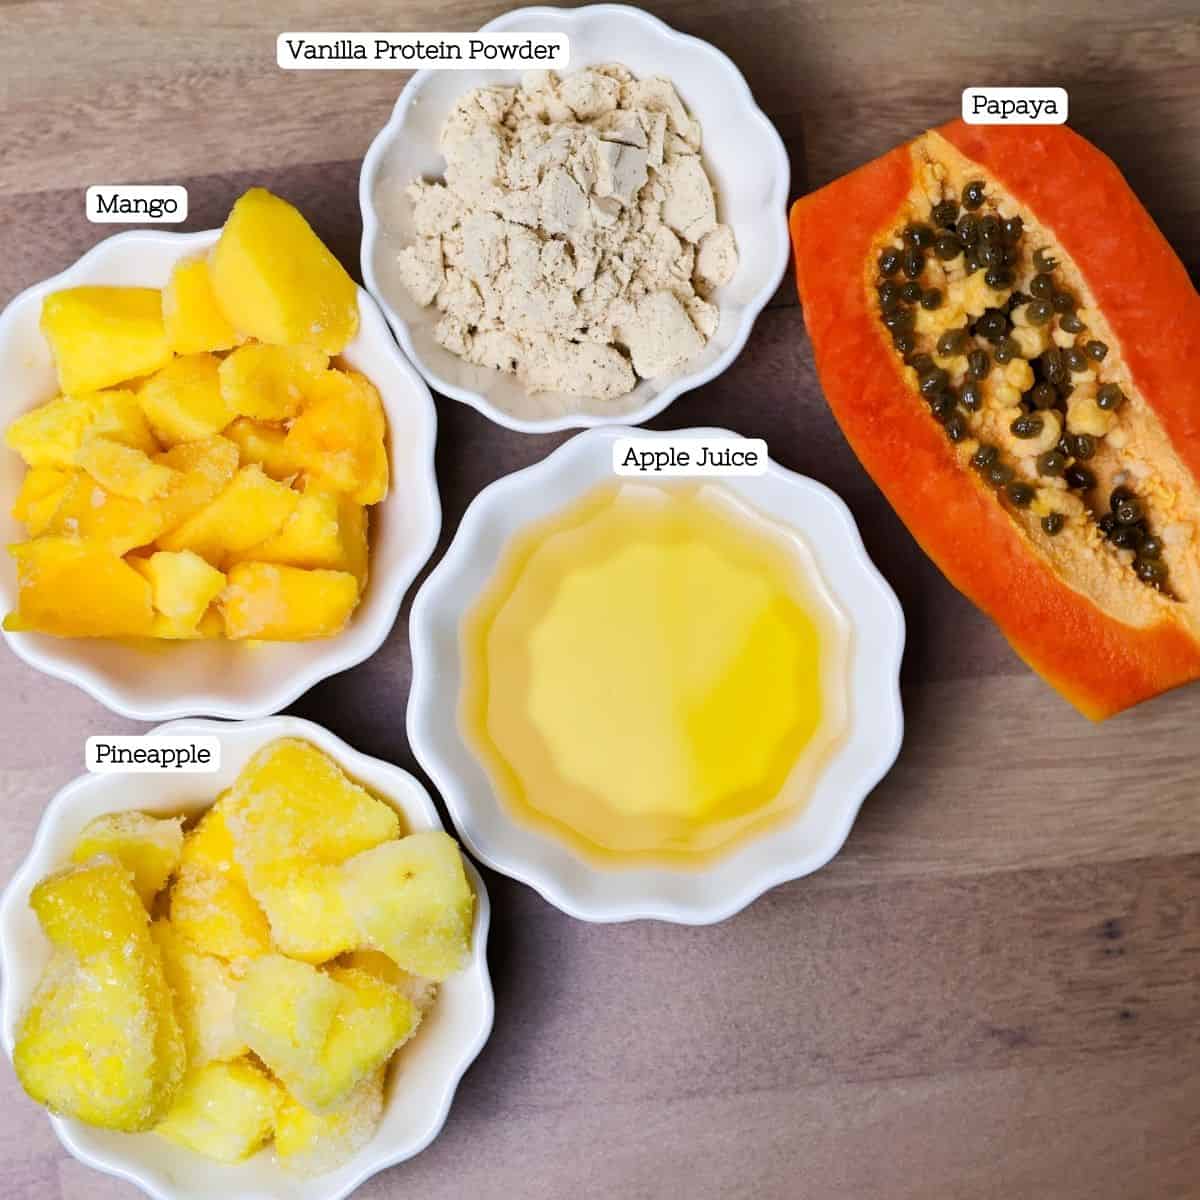 Assortment of ingredients arranged on a wooden surface, including bowls of frozen pineapple, mango, a halved papaya with seeds, apple juice, and vanilla protein powder.